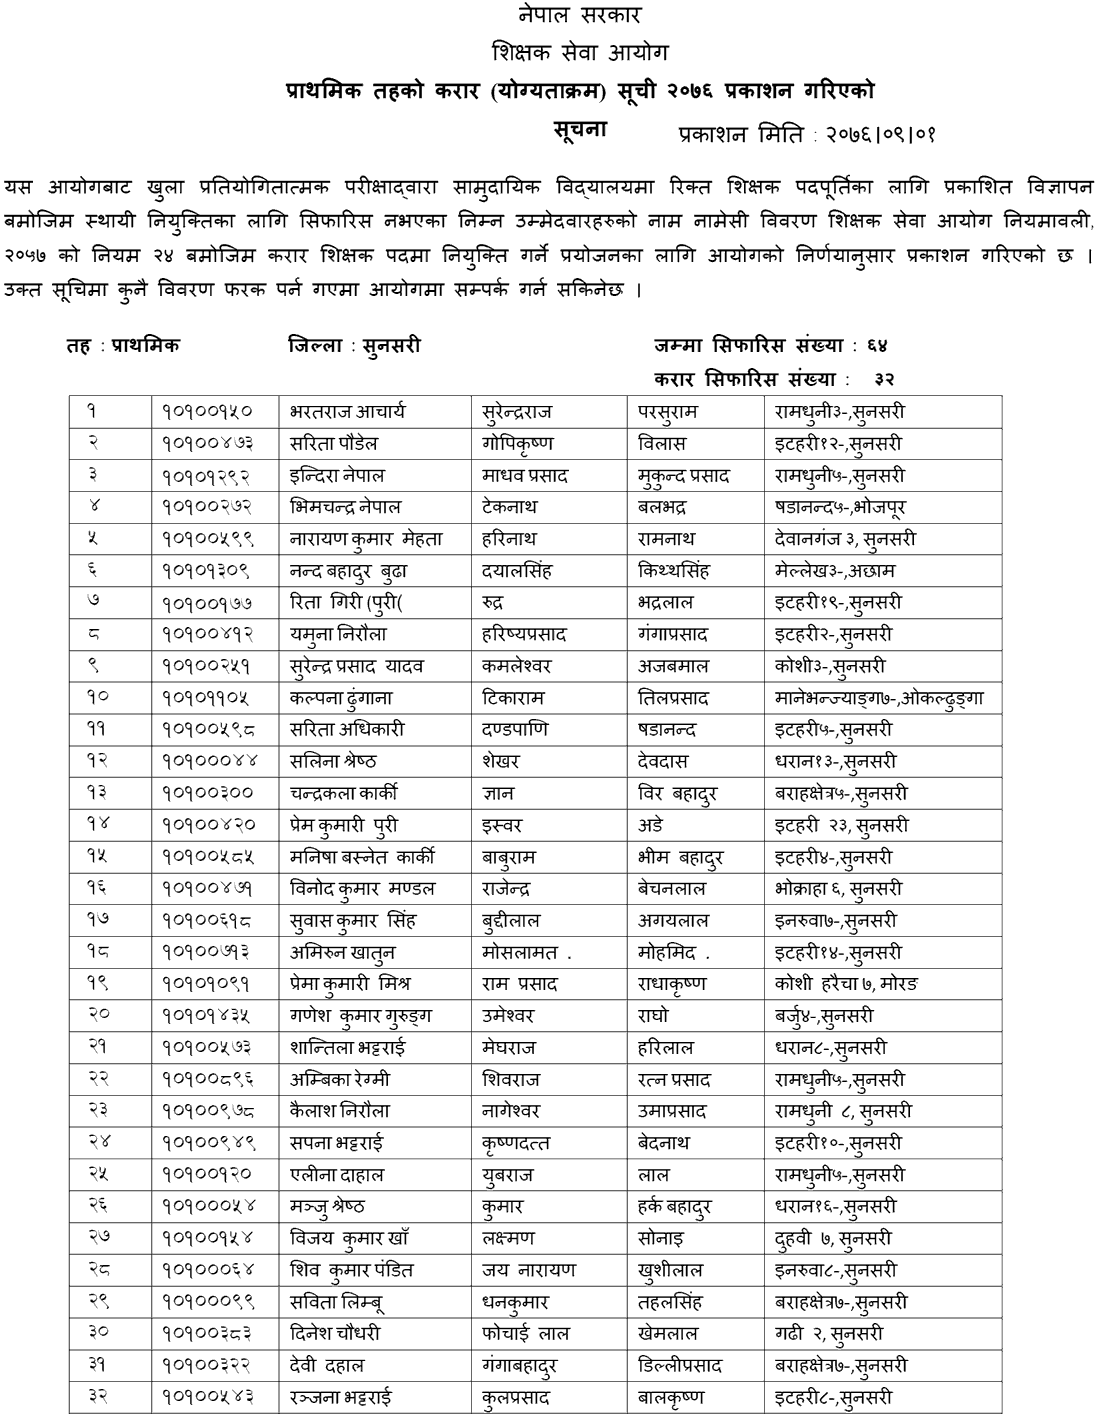 TSC Published Primary Level Contract List of Sunsari